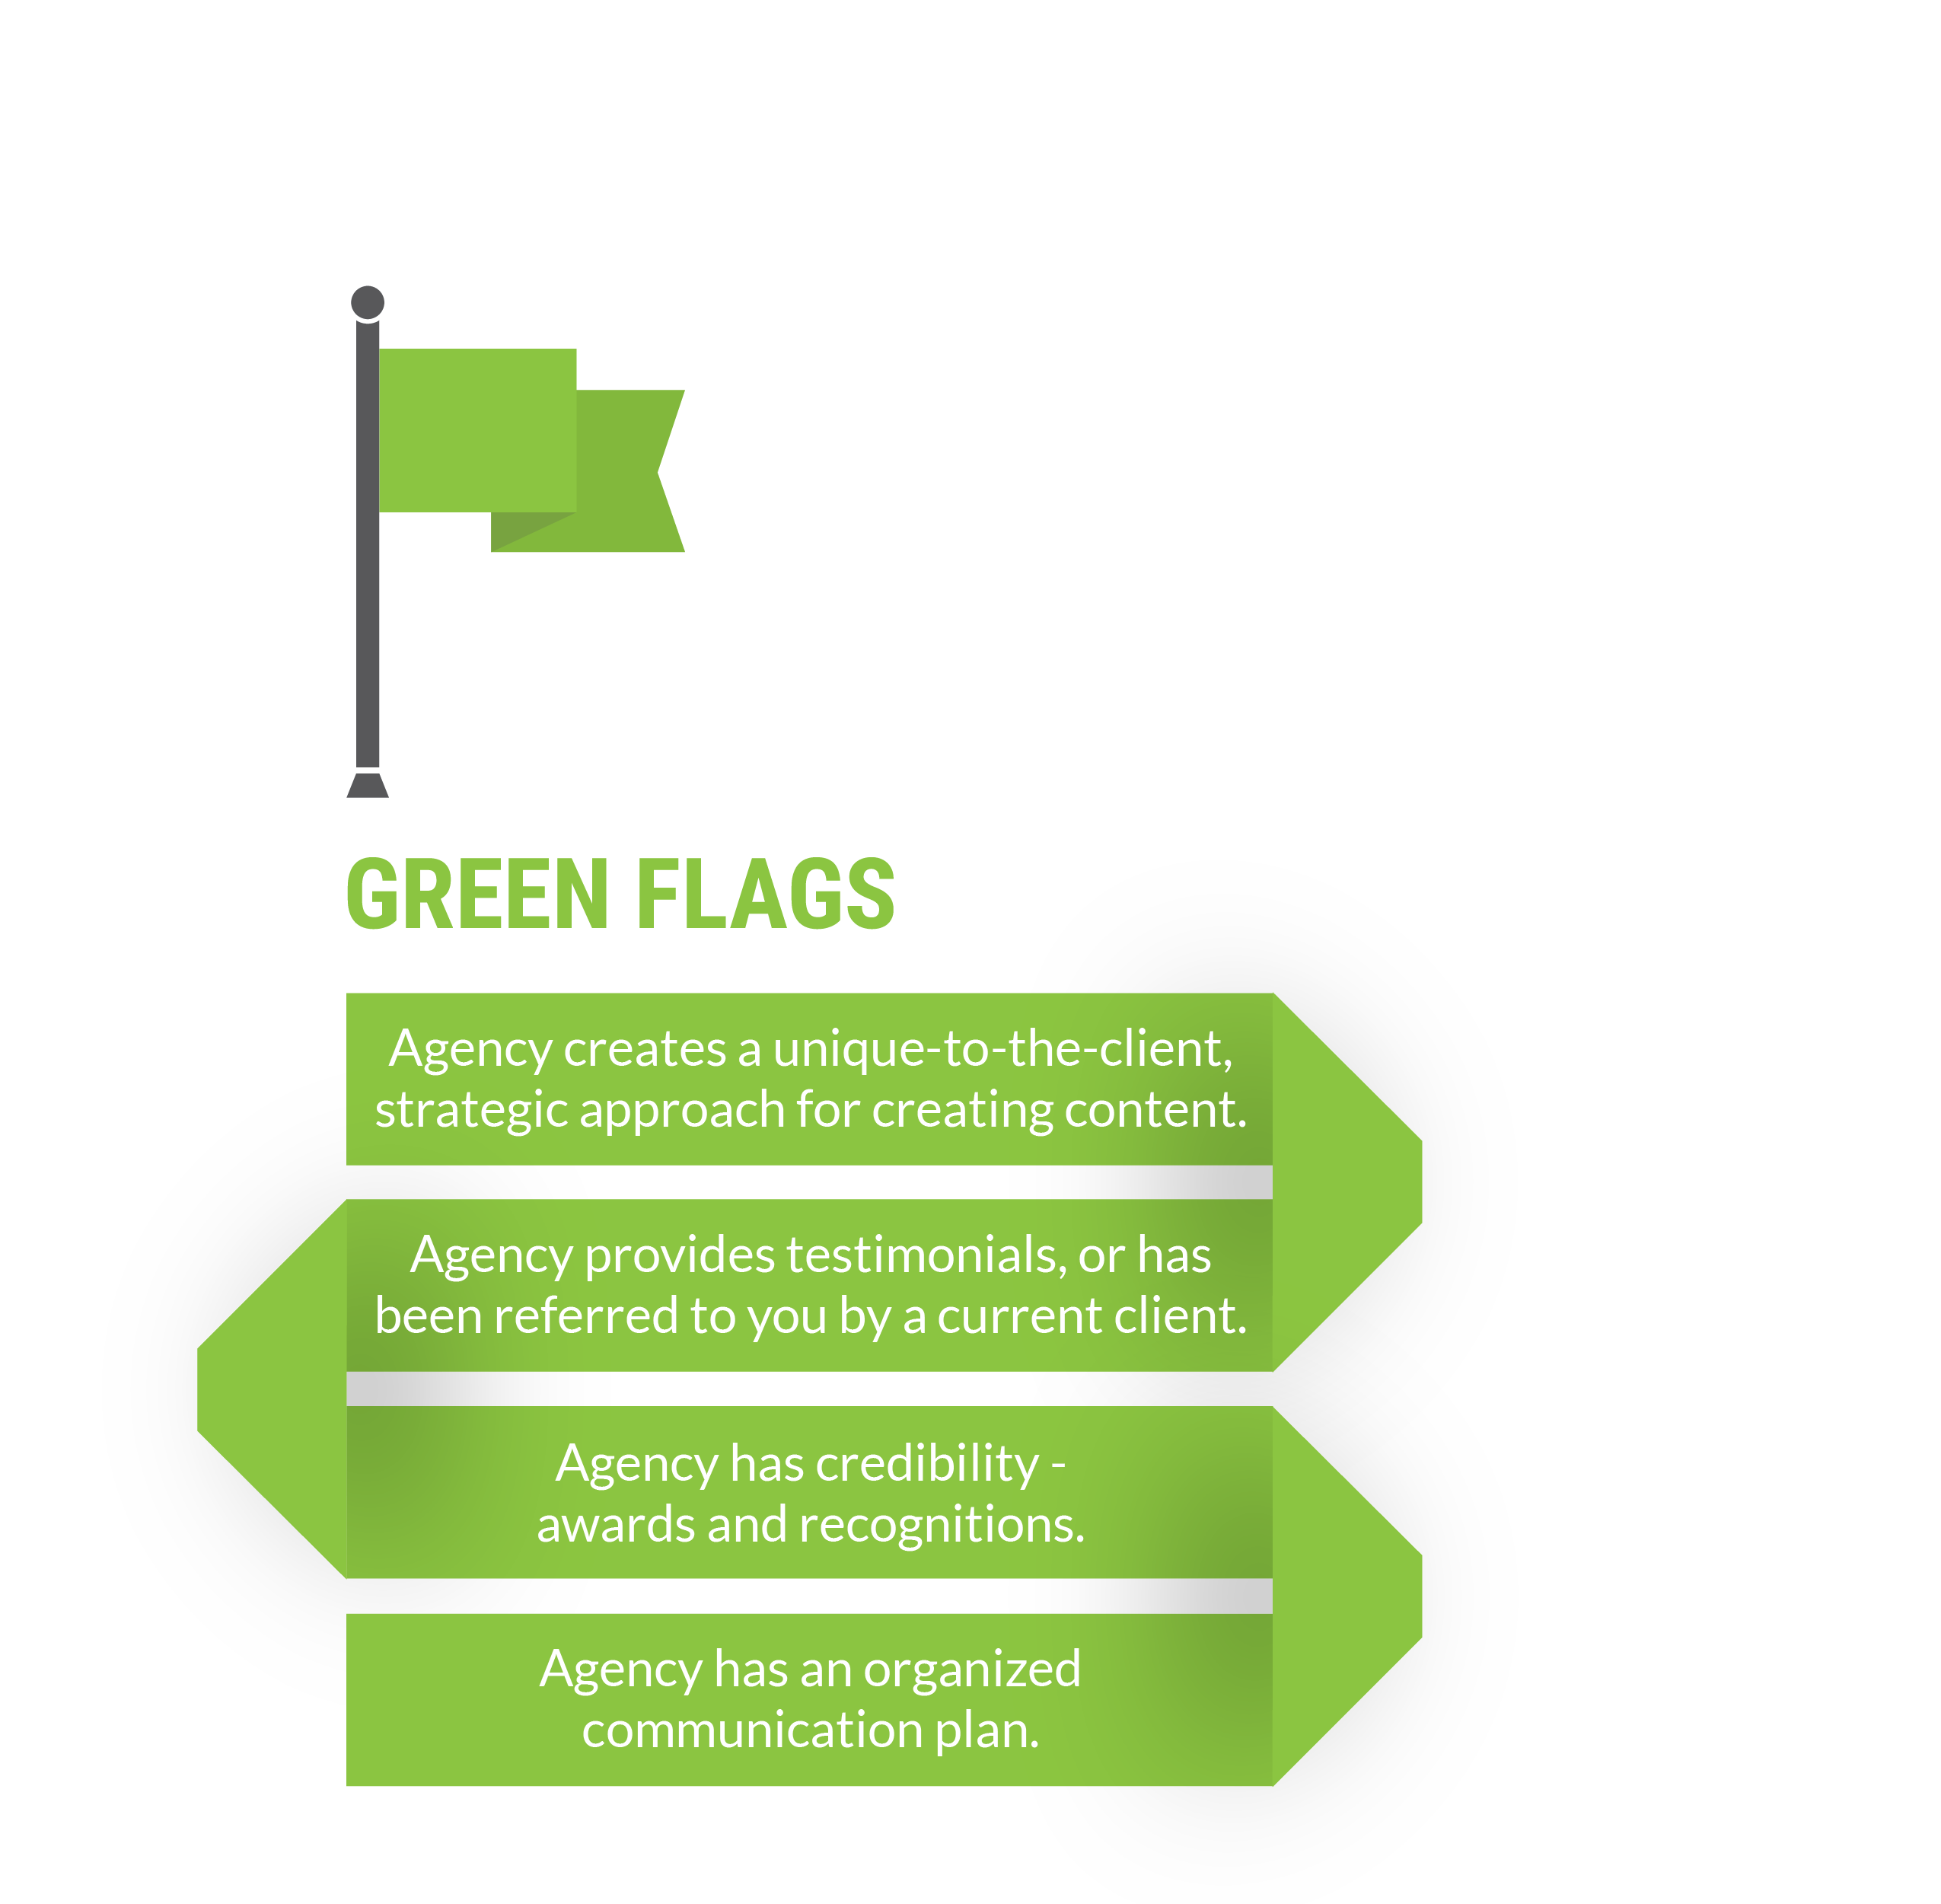 green flags: agency creates a unique-to-the-client strategic approach for creating content. Agency provides testimonials, or has been referred to you by a current client. Agency has credibility - awards and recognitions. Agency has an organized communication plan. 